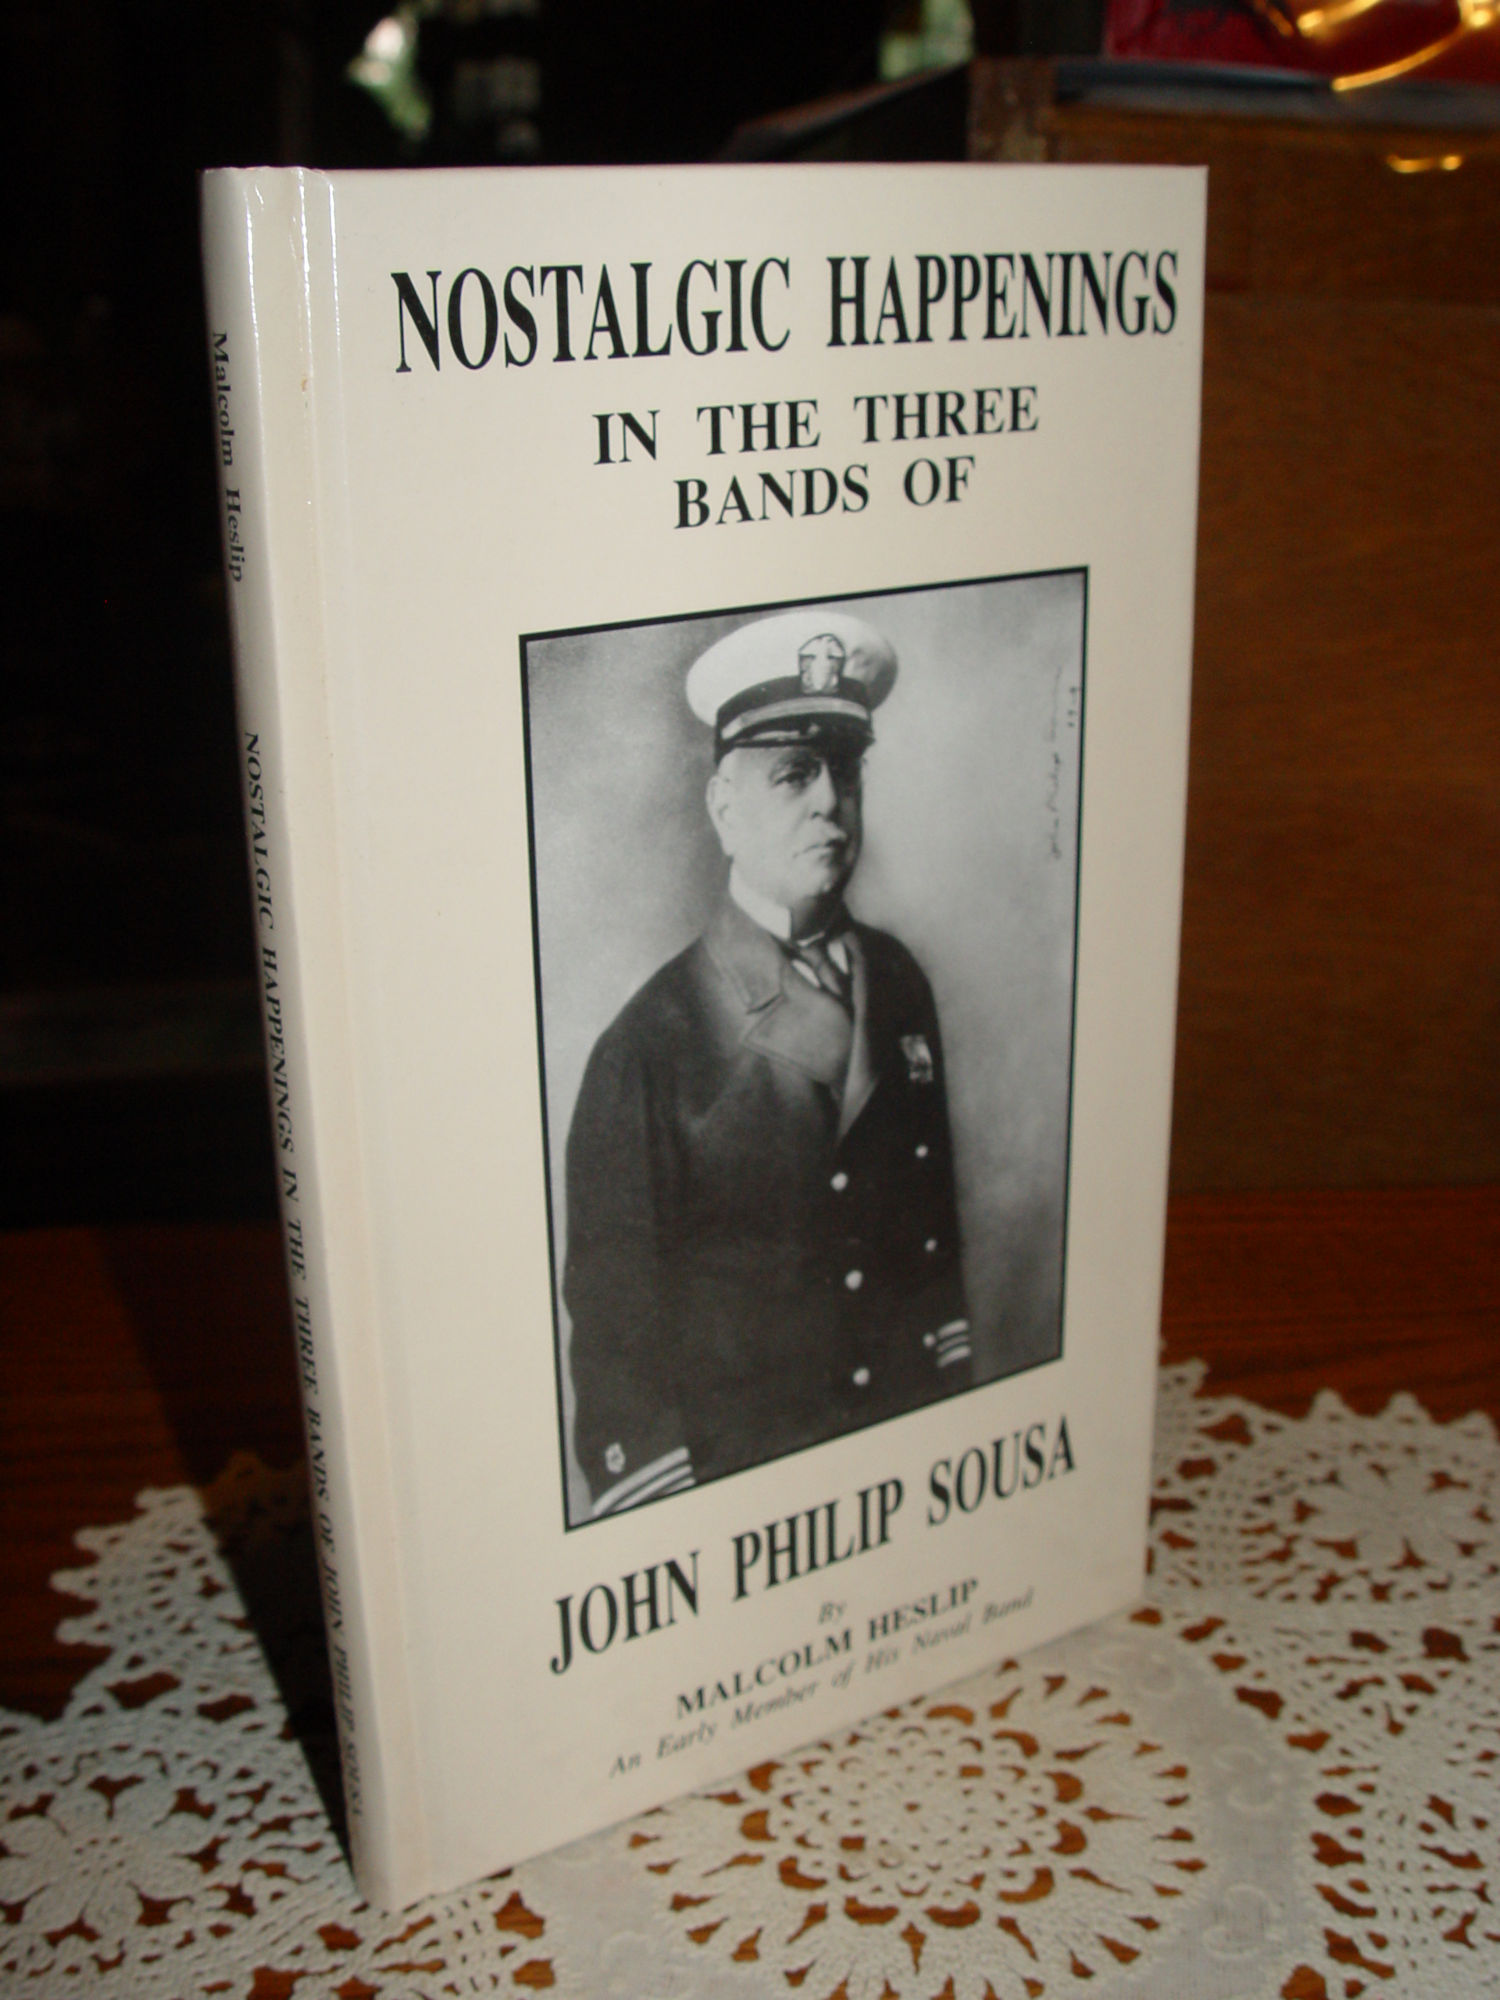 Nostalgic Happenings in the Three Bands of
                        John Philip Sousa 1982 by Malcolm Helip